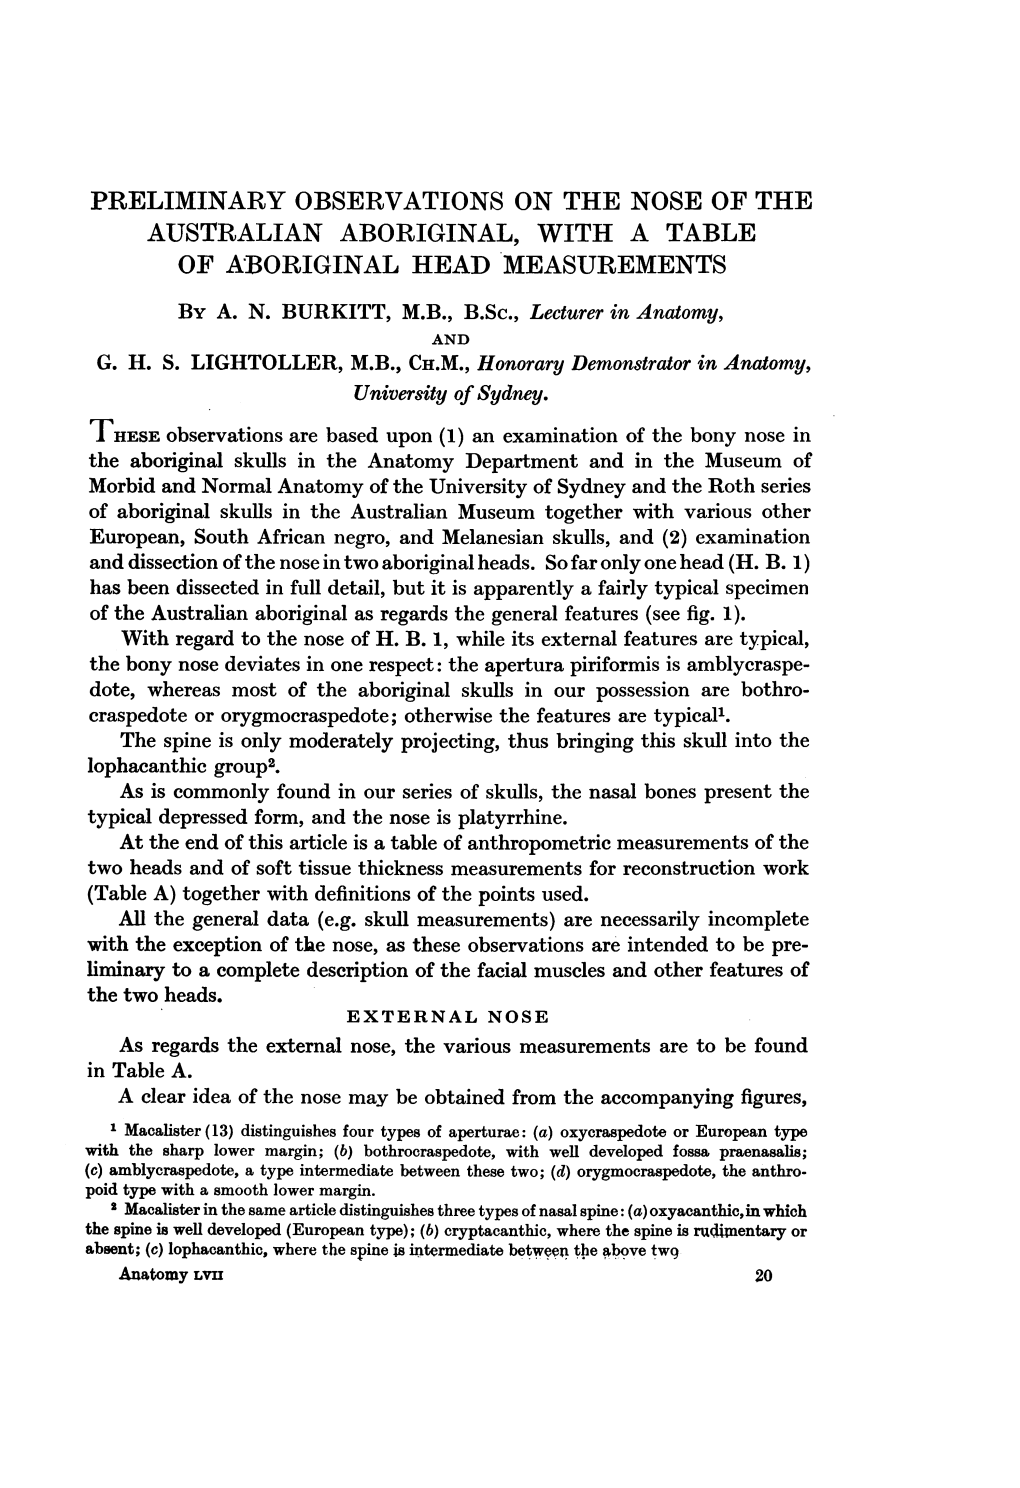 Preliminary Observations on the Nose of the Australian Aboriginal, with a Table of Aboriginal Head Measurements by A